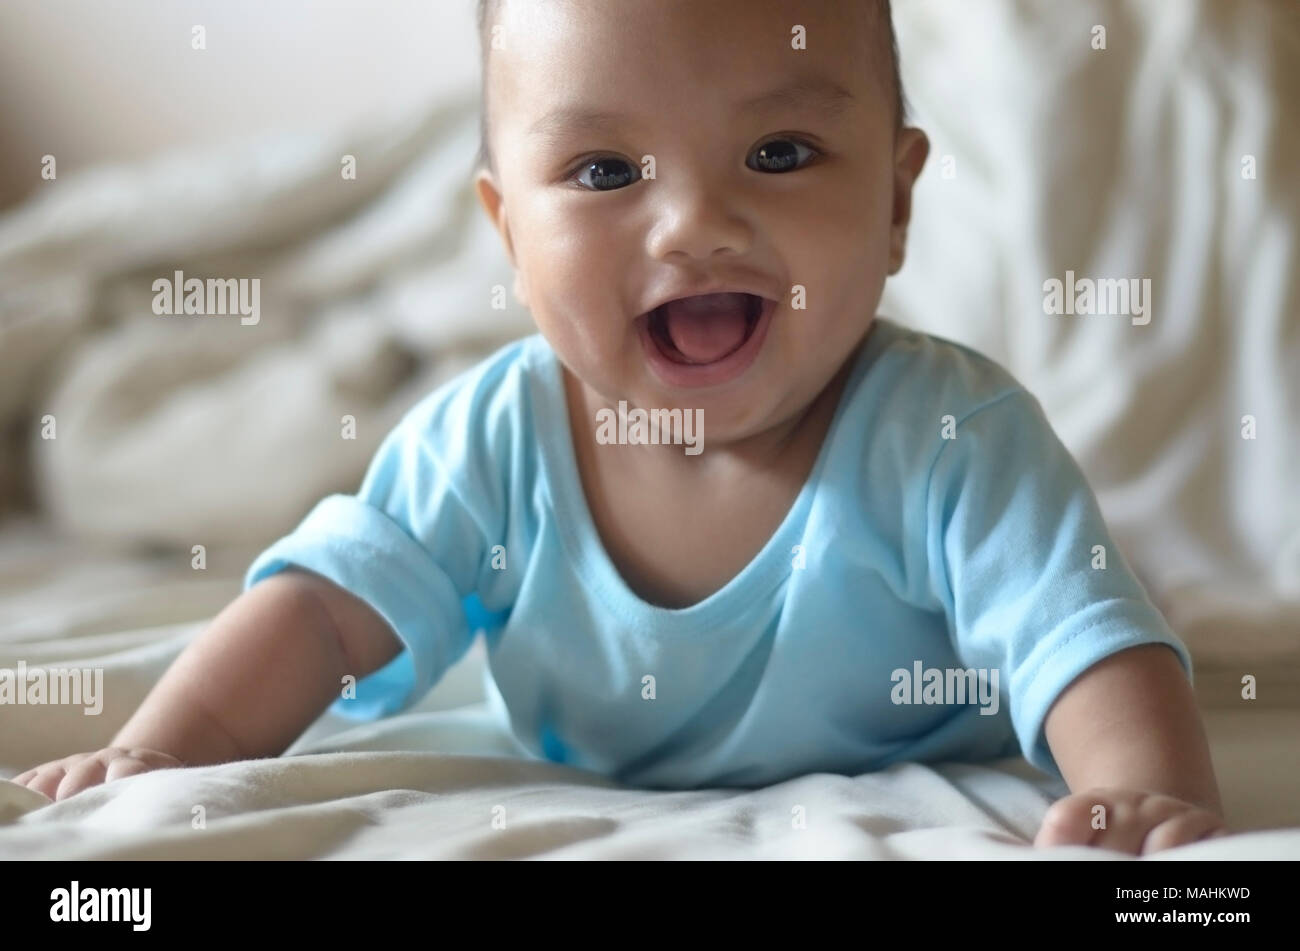 The photographer`s own son photographed when he was five months old. The infant is smiling in a semi-prone position or half-lying on his stomach . Stock Photo